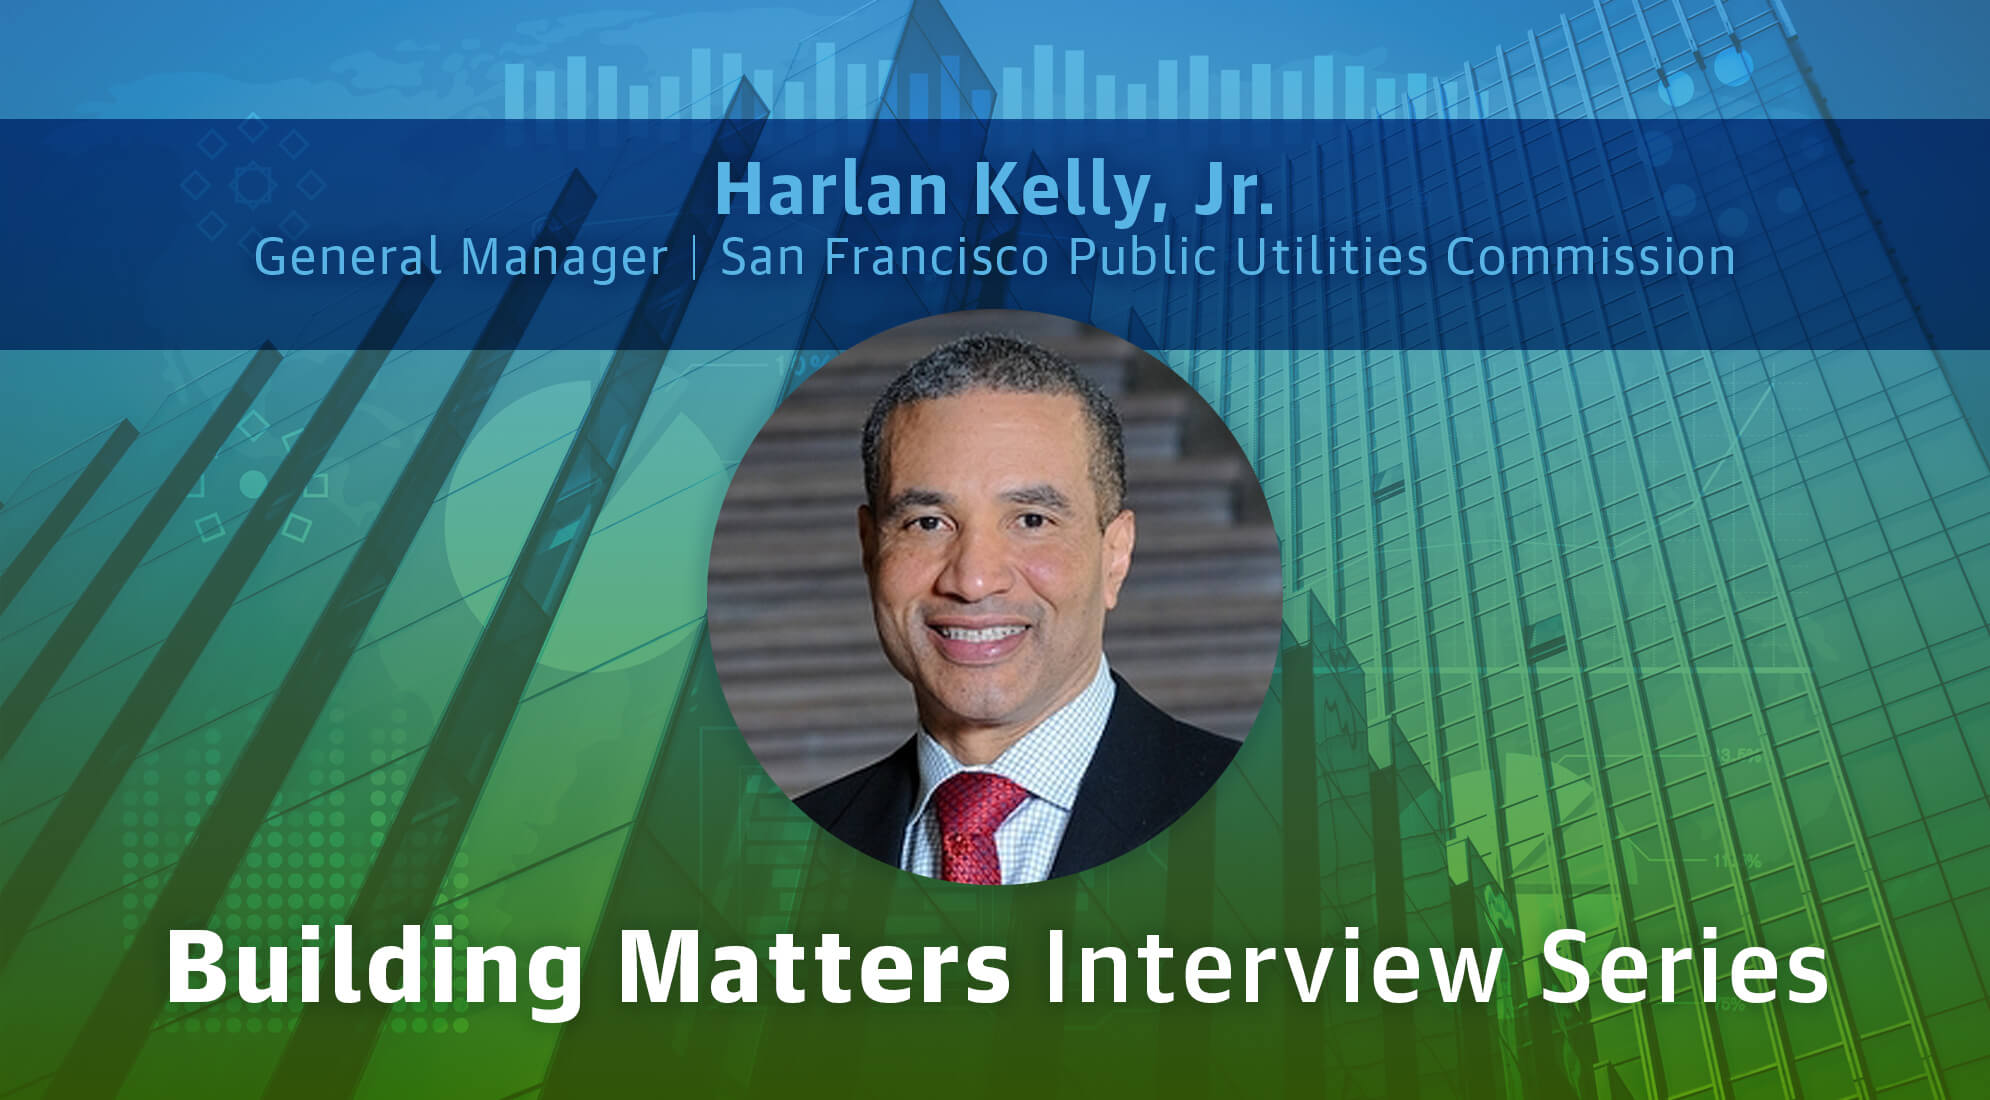 Building Matters Interview Series: Public Utilities Insights from Harlan Kelly, Jr. 2